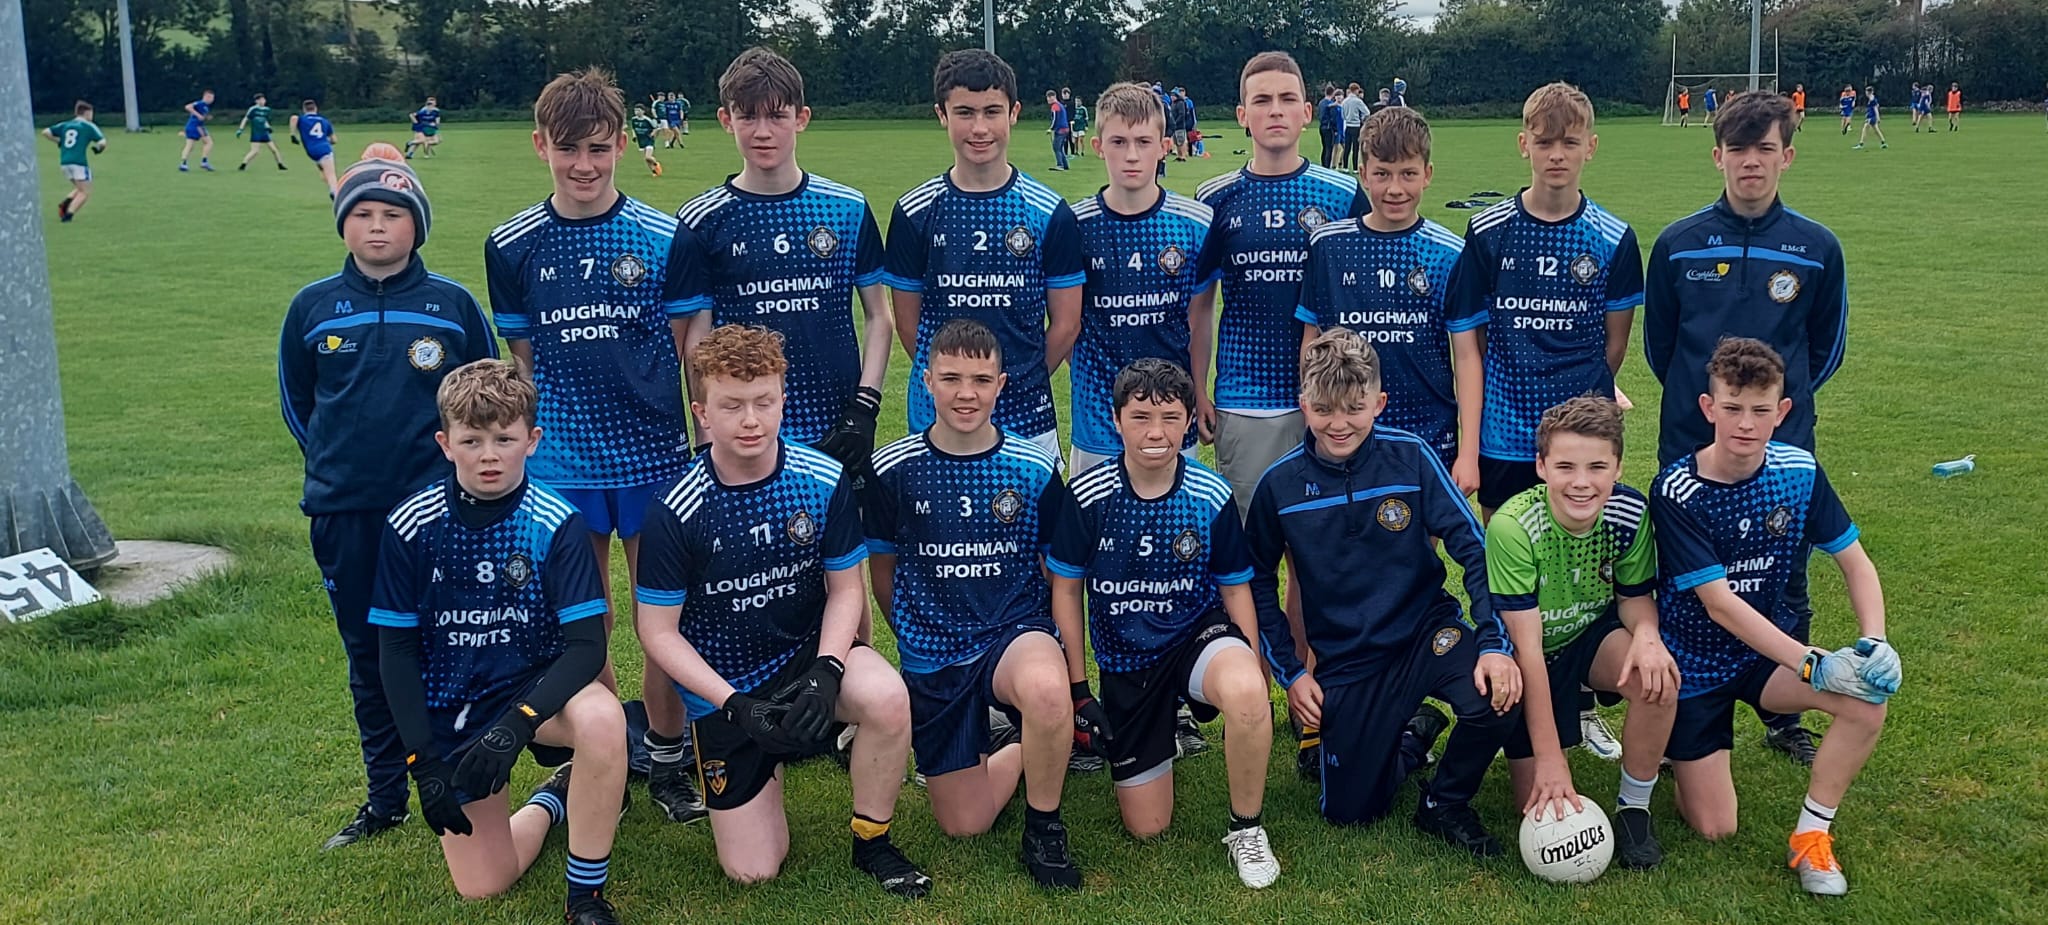 Monaghan Secondary School Super Touch Blitzes continue over the past number of weeks….